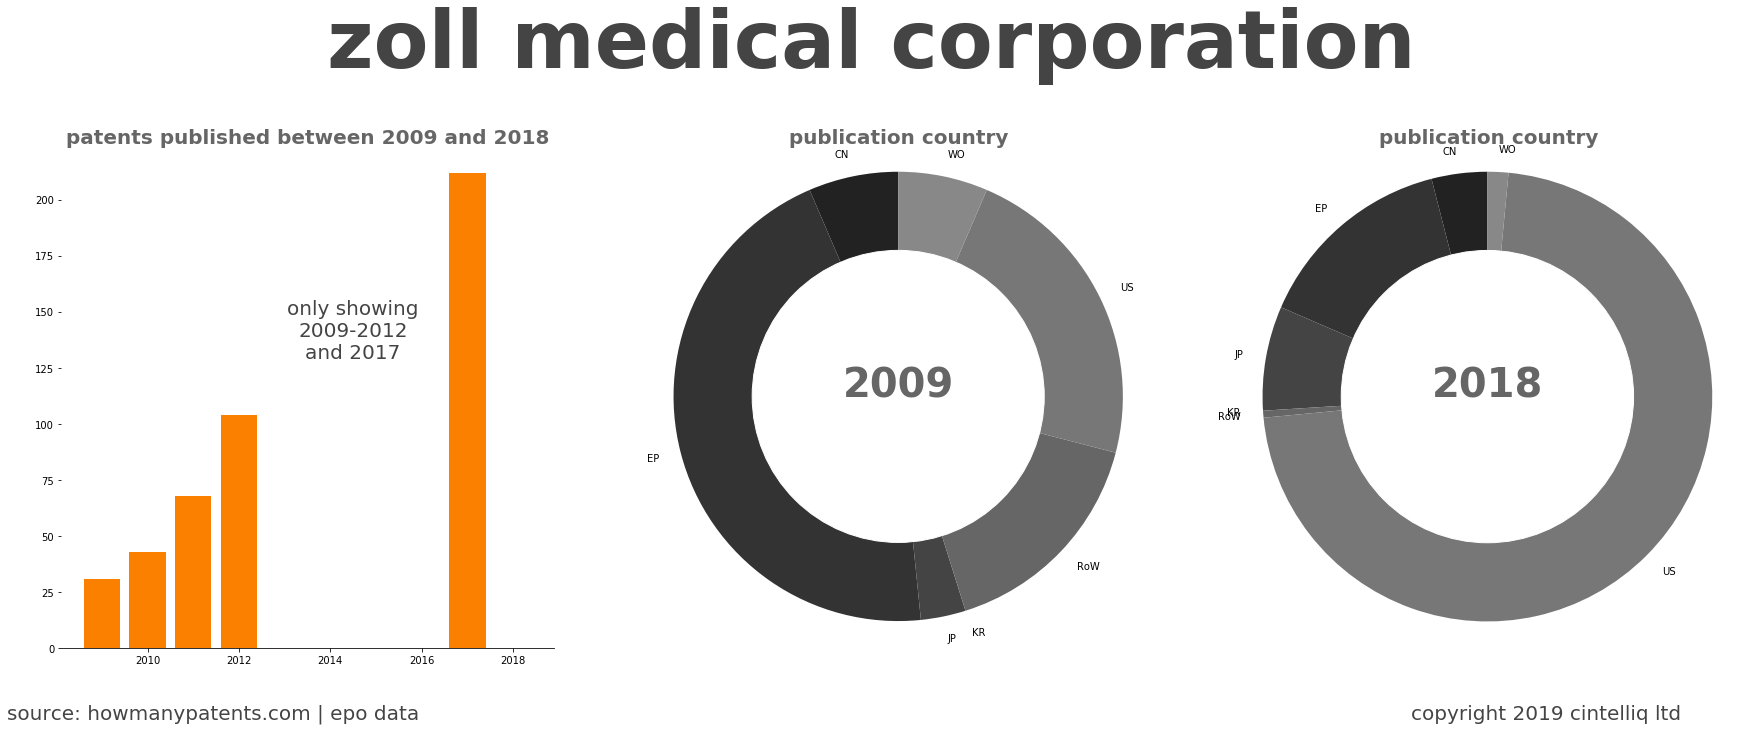 summary of patents for Zoll Medical Corporation